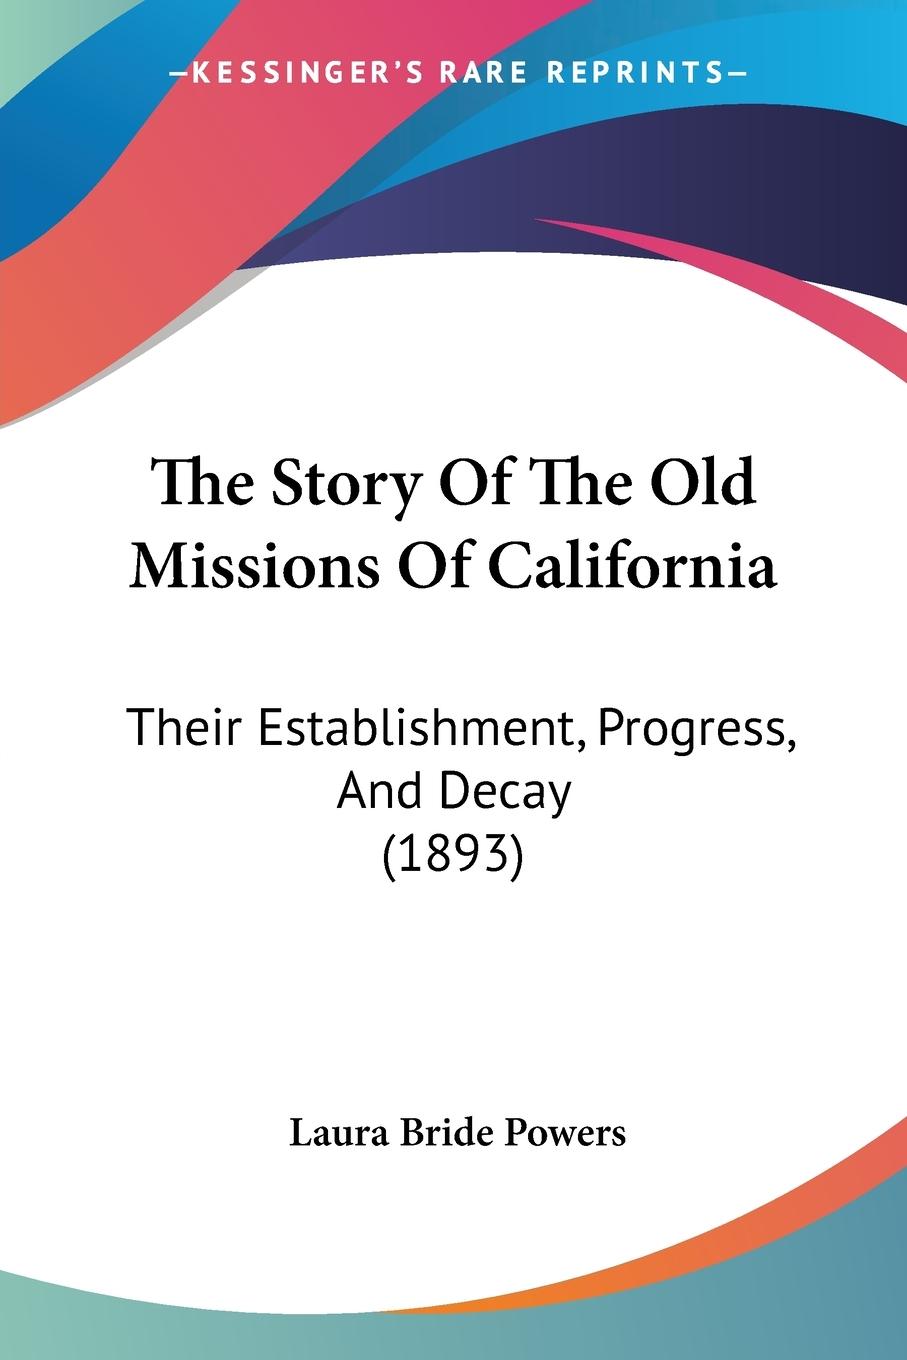 The Story Of The Old Missions Of California - Powers, Laura Bride